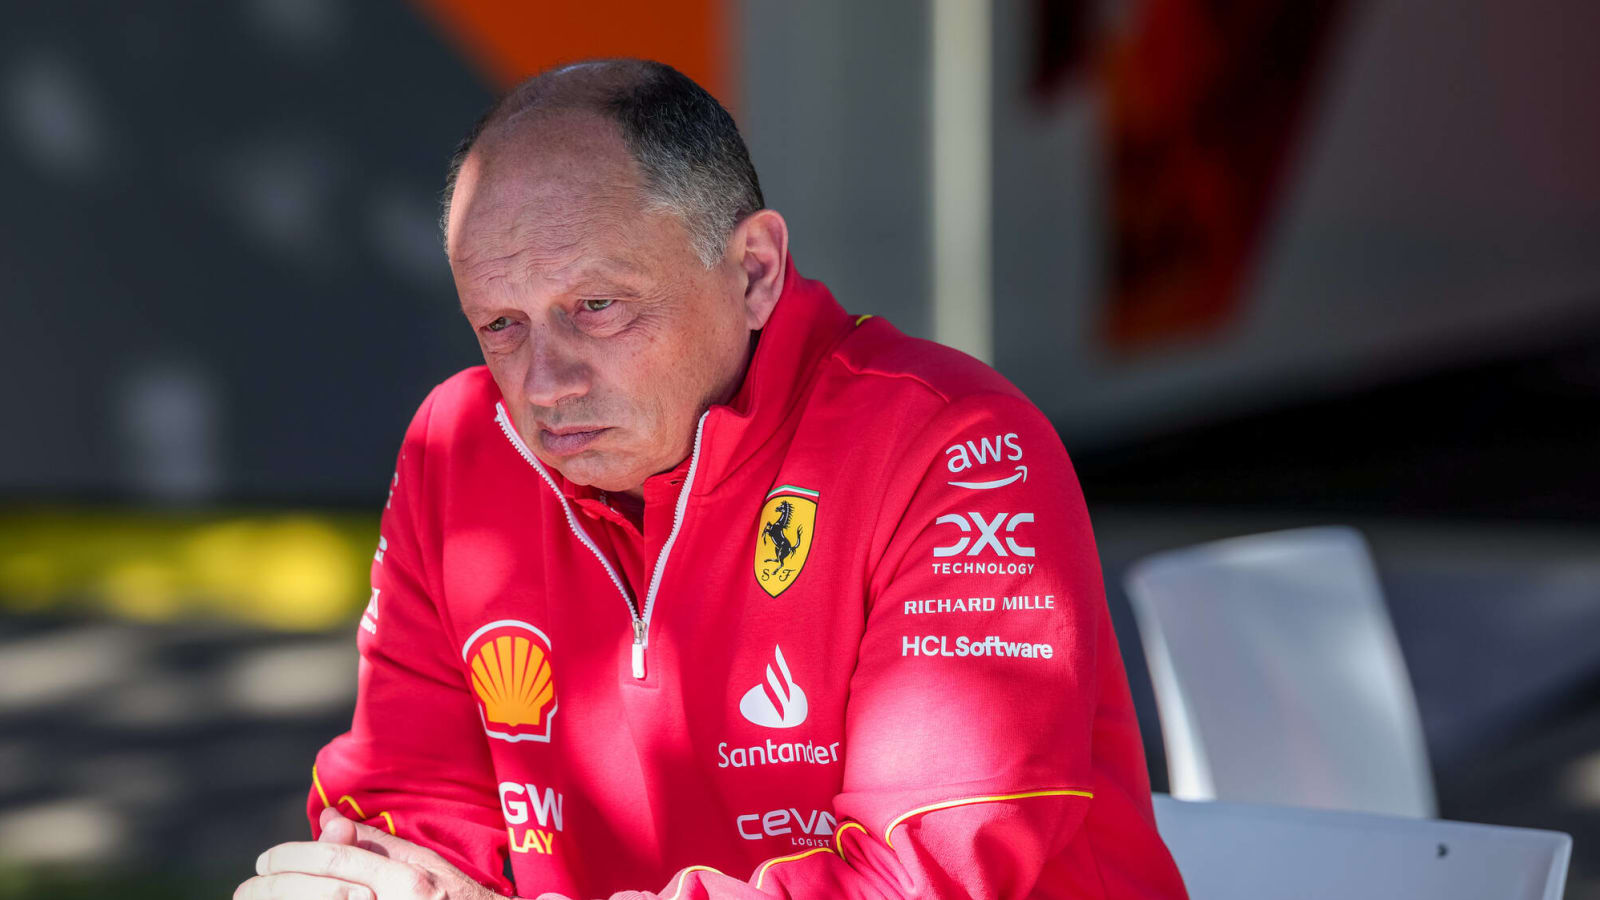 Fred Vasseur claims Ferrari now has the pace to fight against Max Verstappen and Red Bull